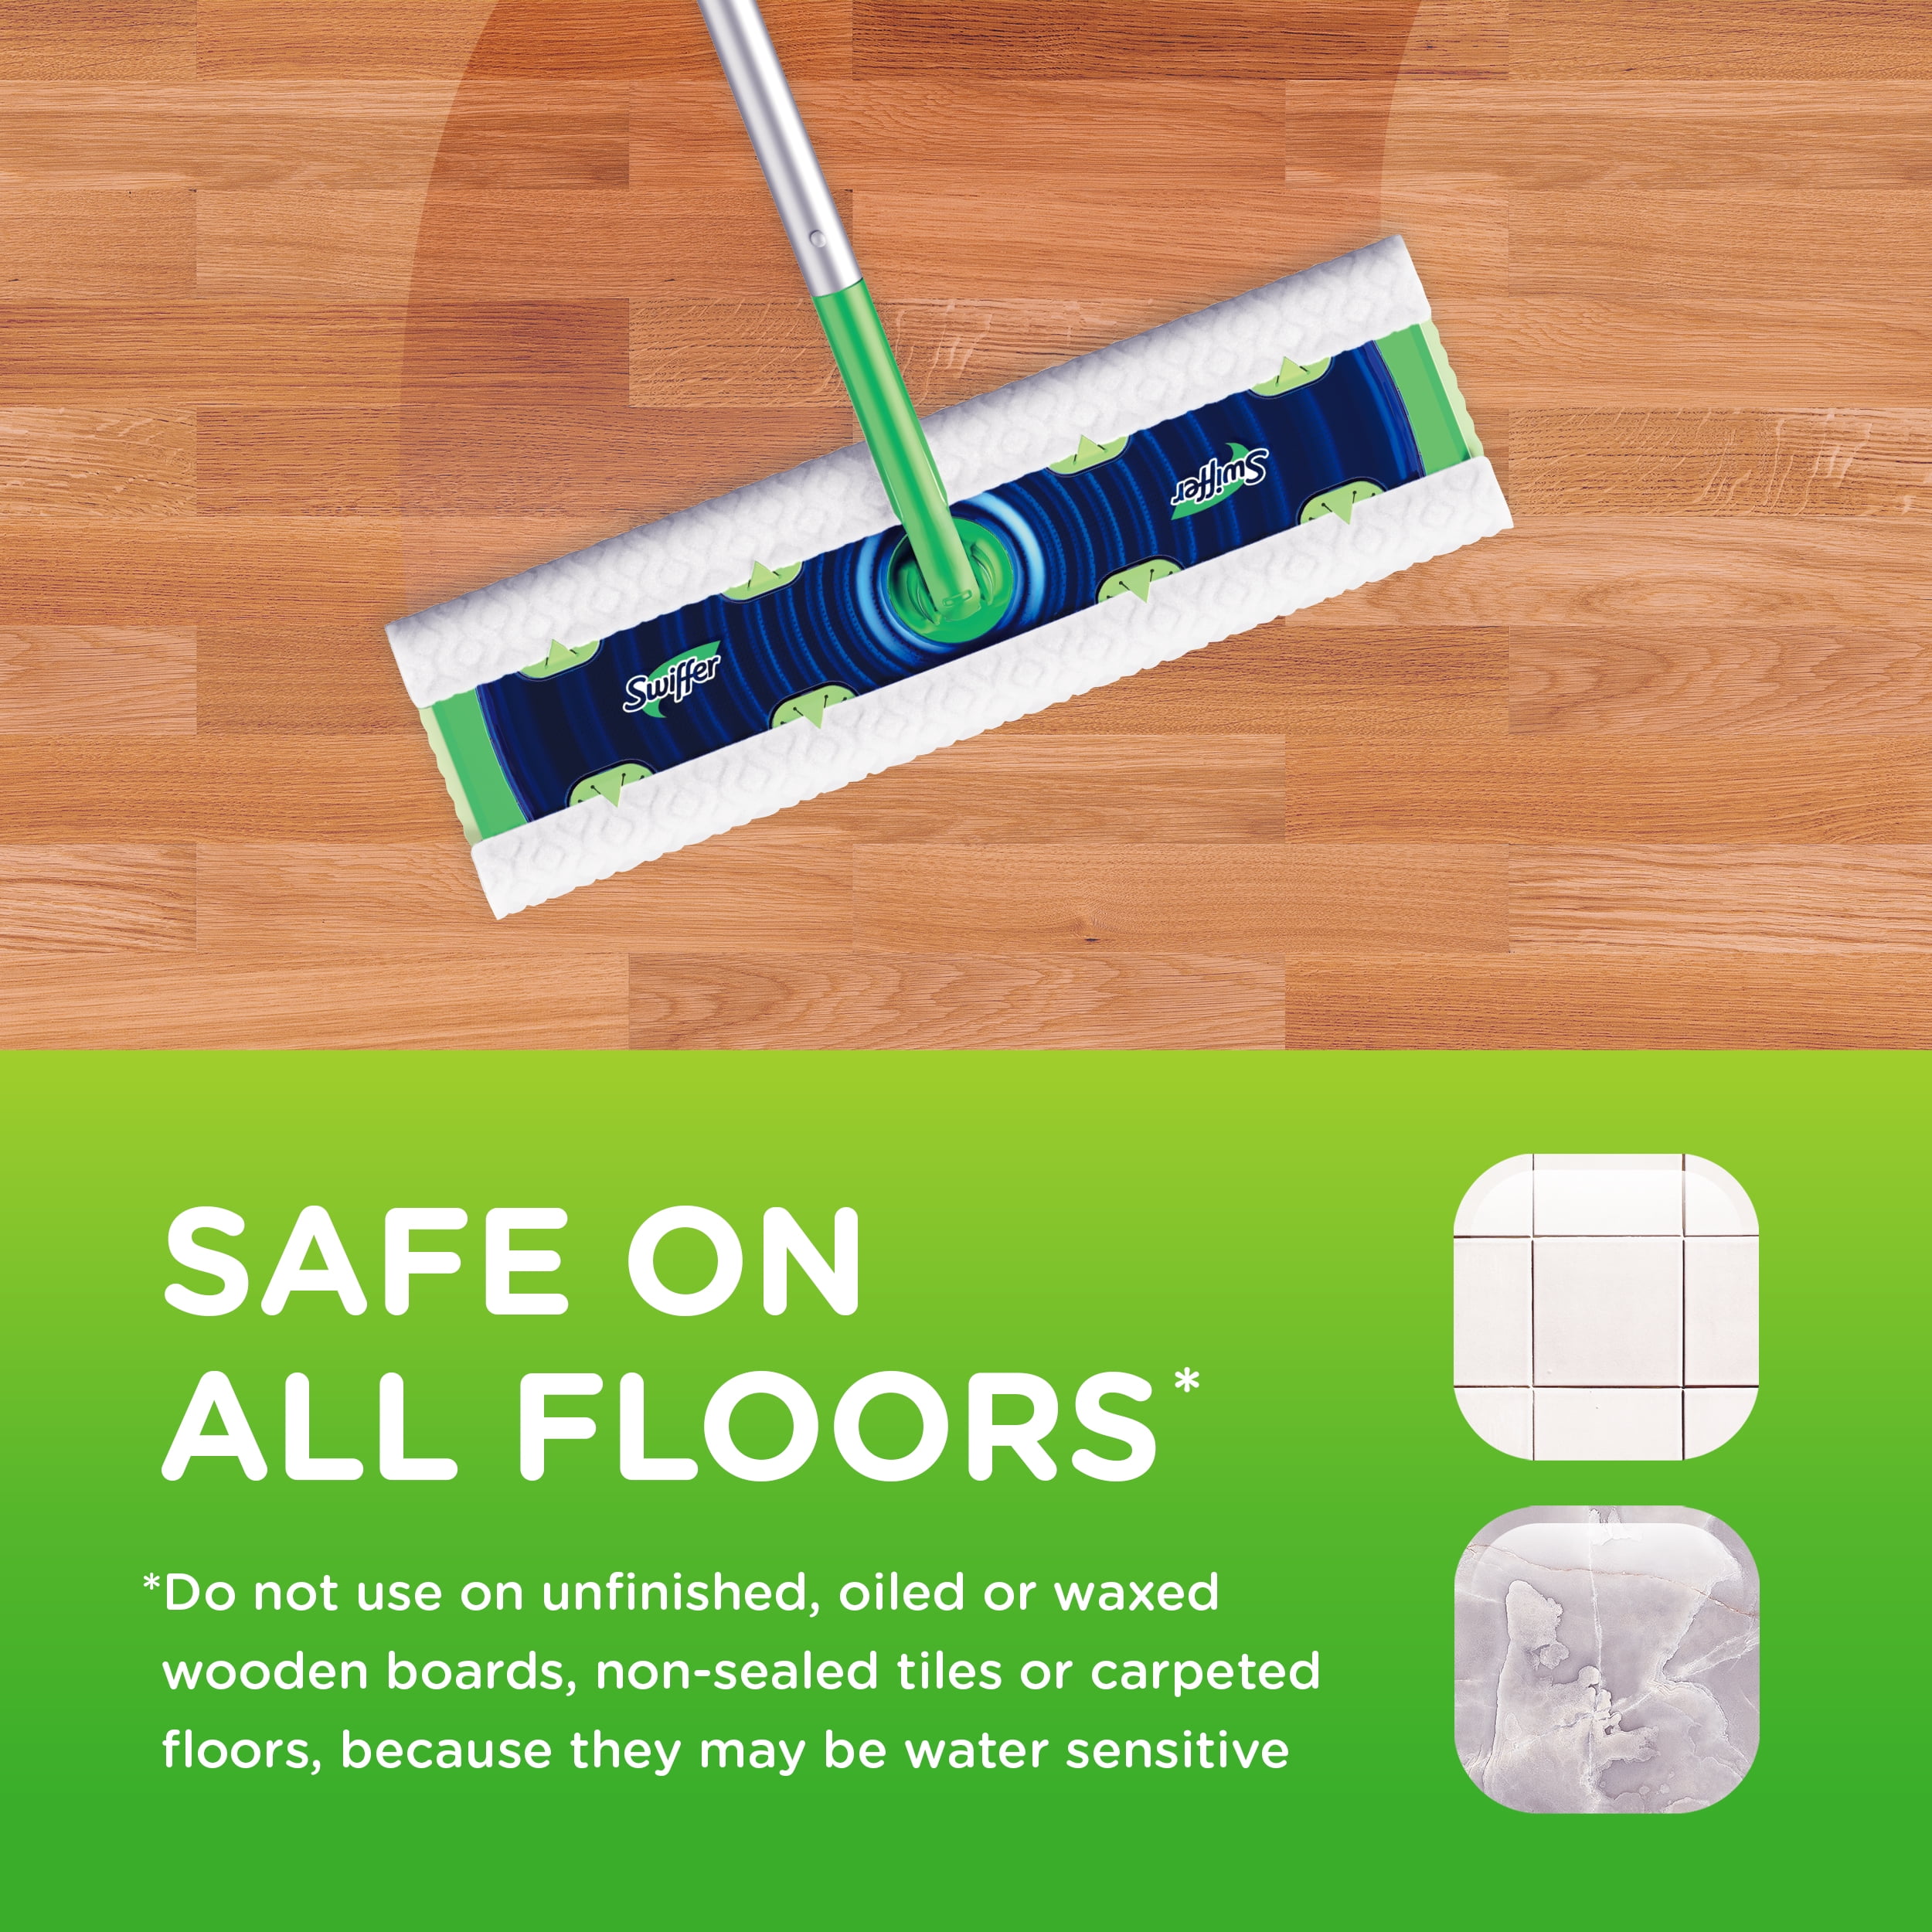 Sweeper Xl Wet Mopping Cloth Refills, Can You Use Swiffer Sweeper Wet On Laminate Floors